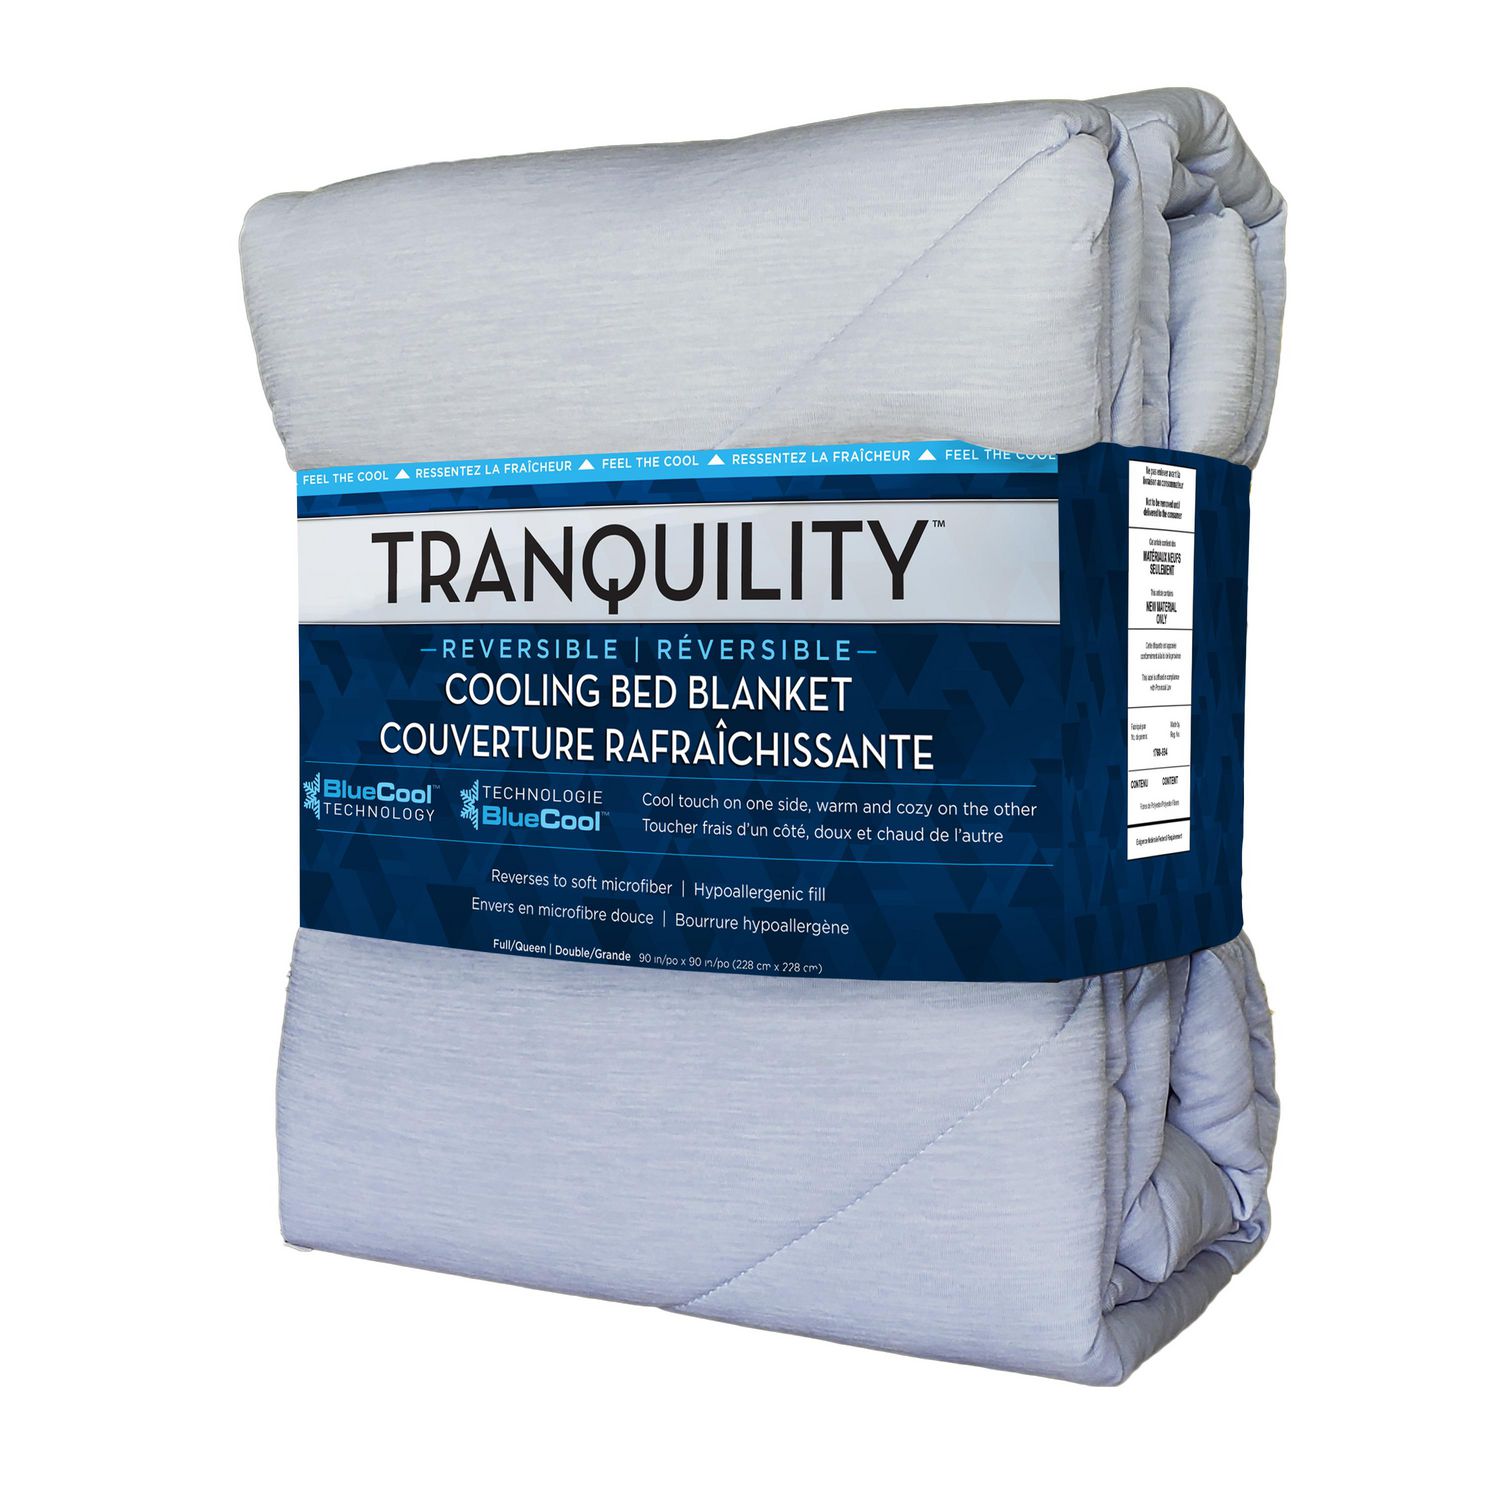 Tranquility Reversible Cooling Bed Blanket | Walmart Canada